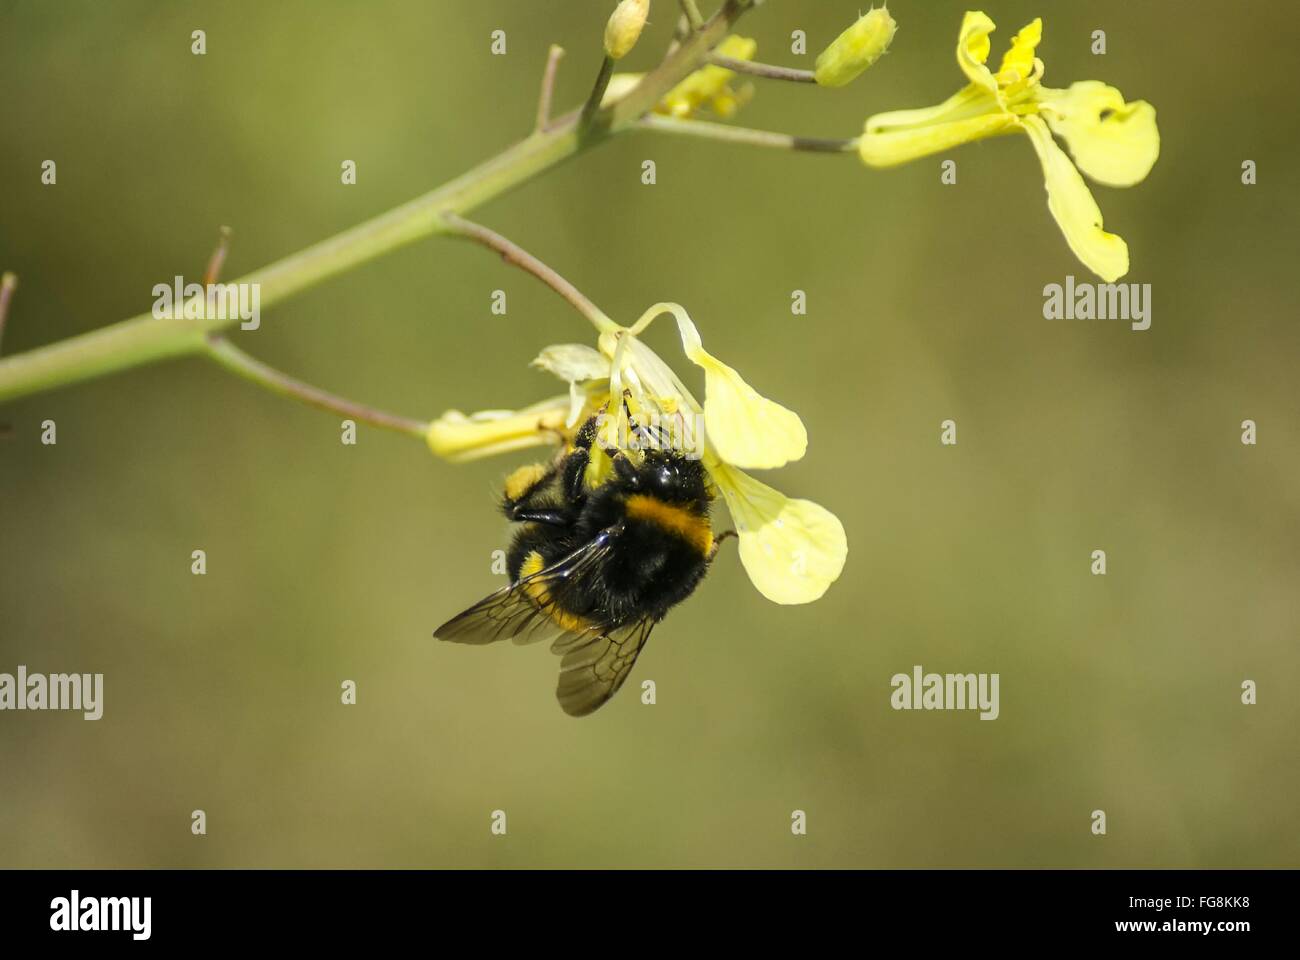 Close-Up Of Bumble Bee On Flower Stock Photo